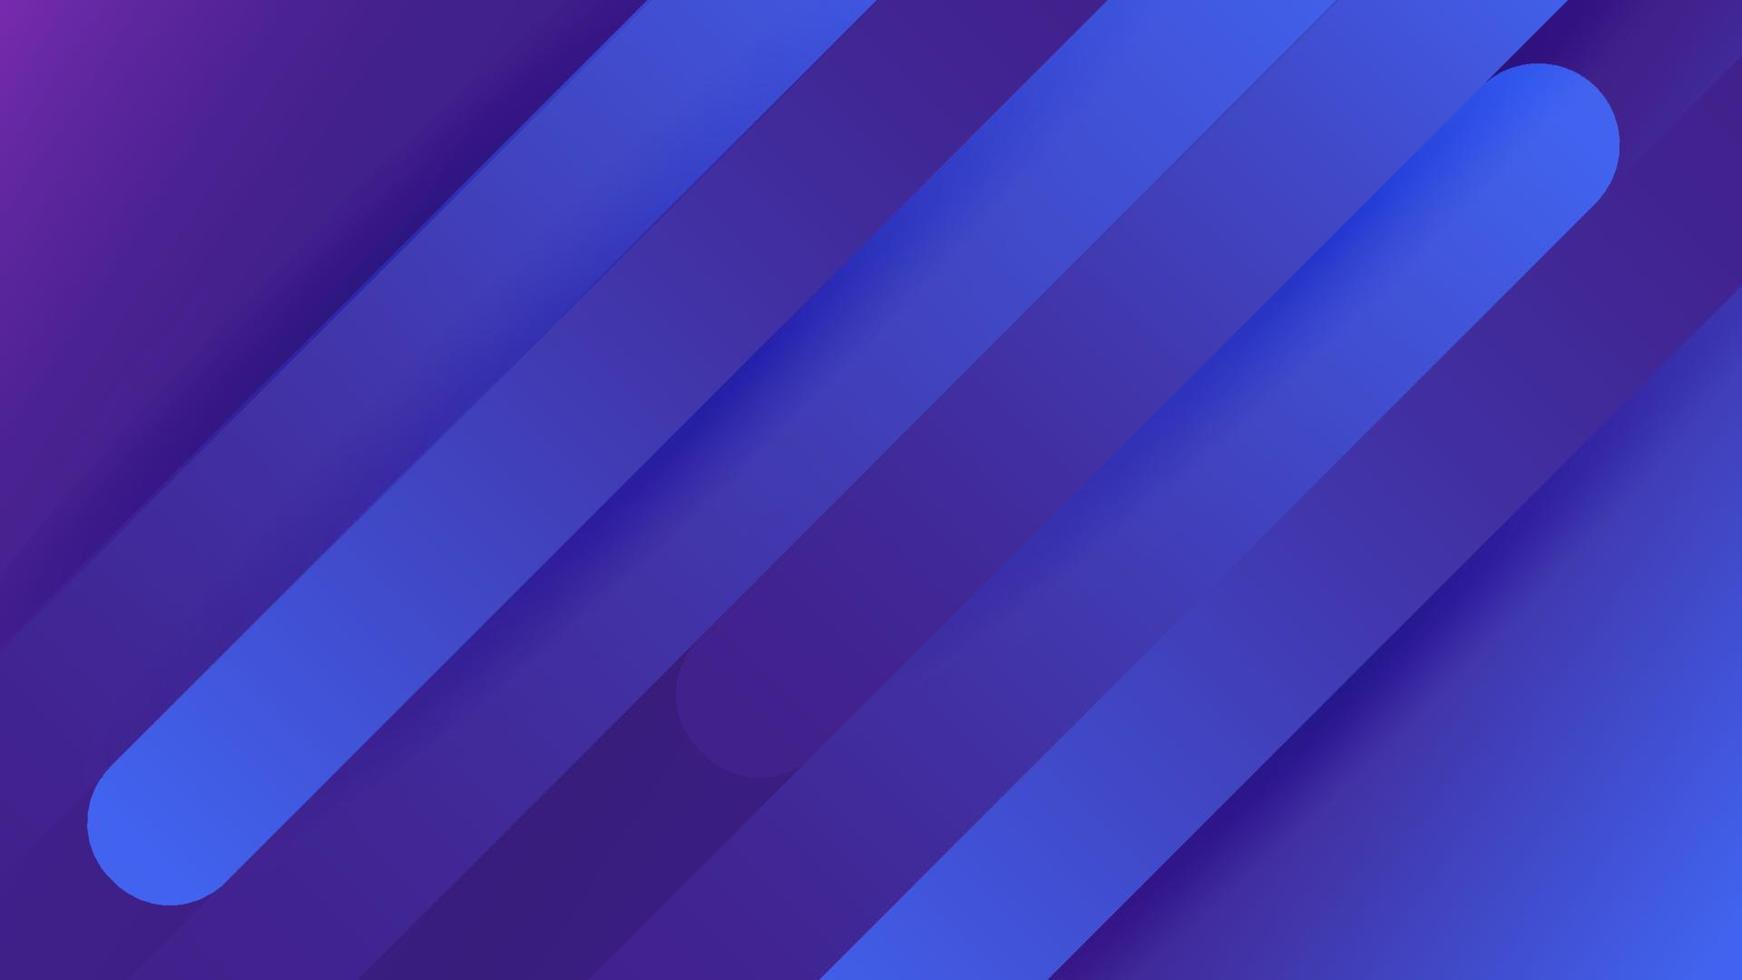 Abstract wallpaper created with simple gradient lines. vector